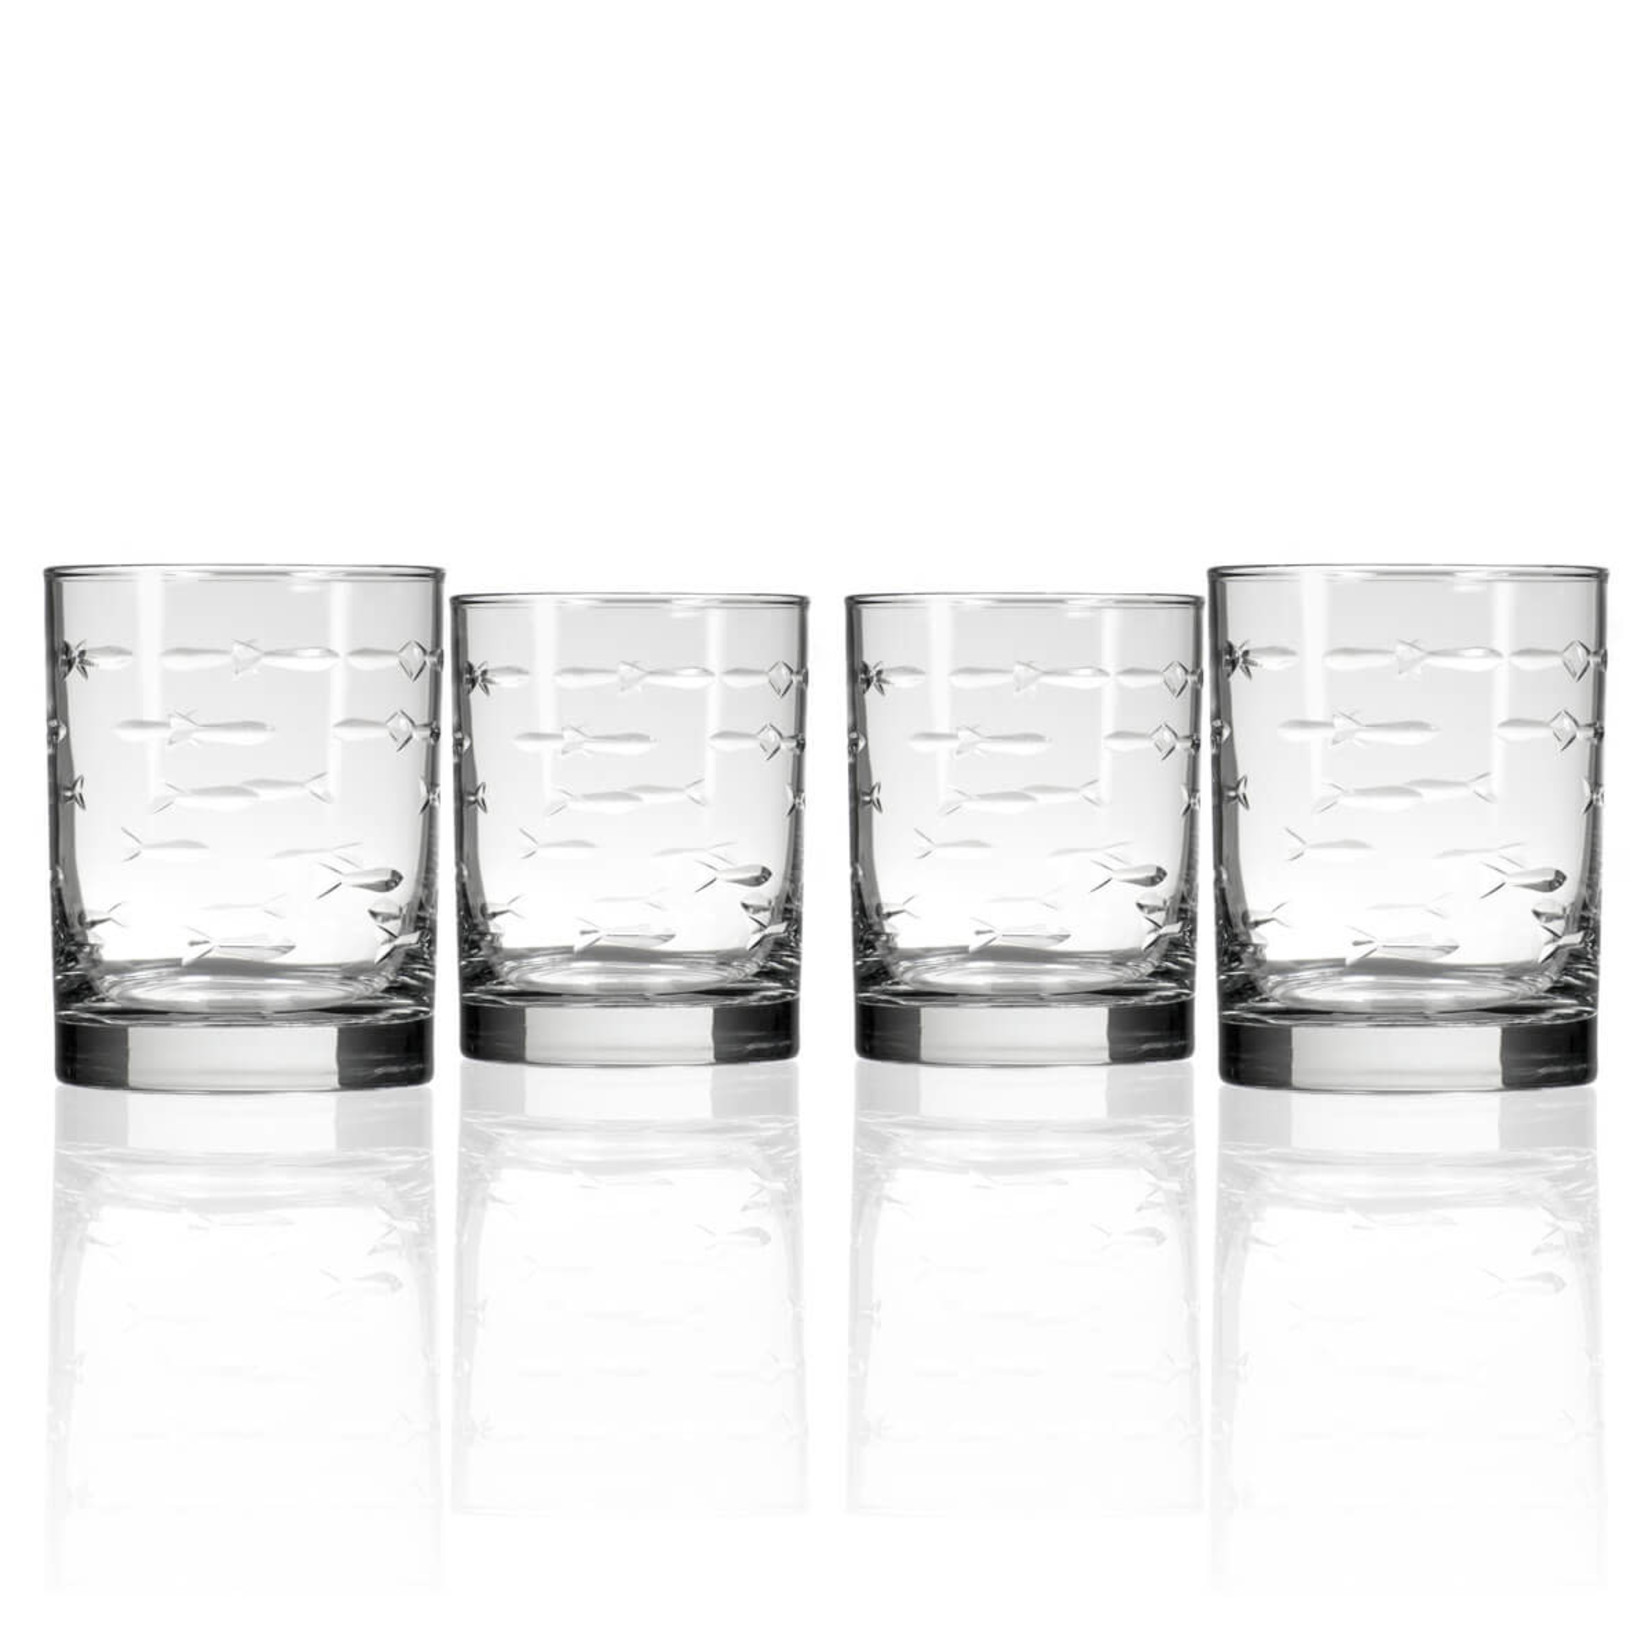 School of Fish Stemless Wine Glass Tumblers by Rolf Glass